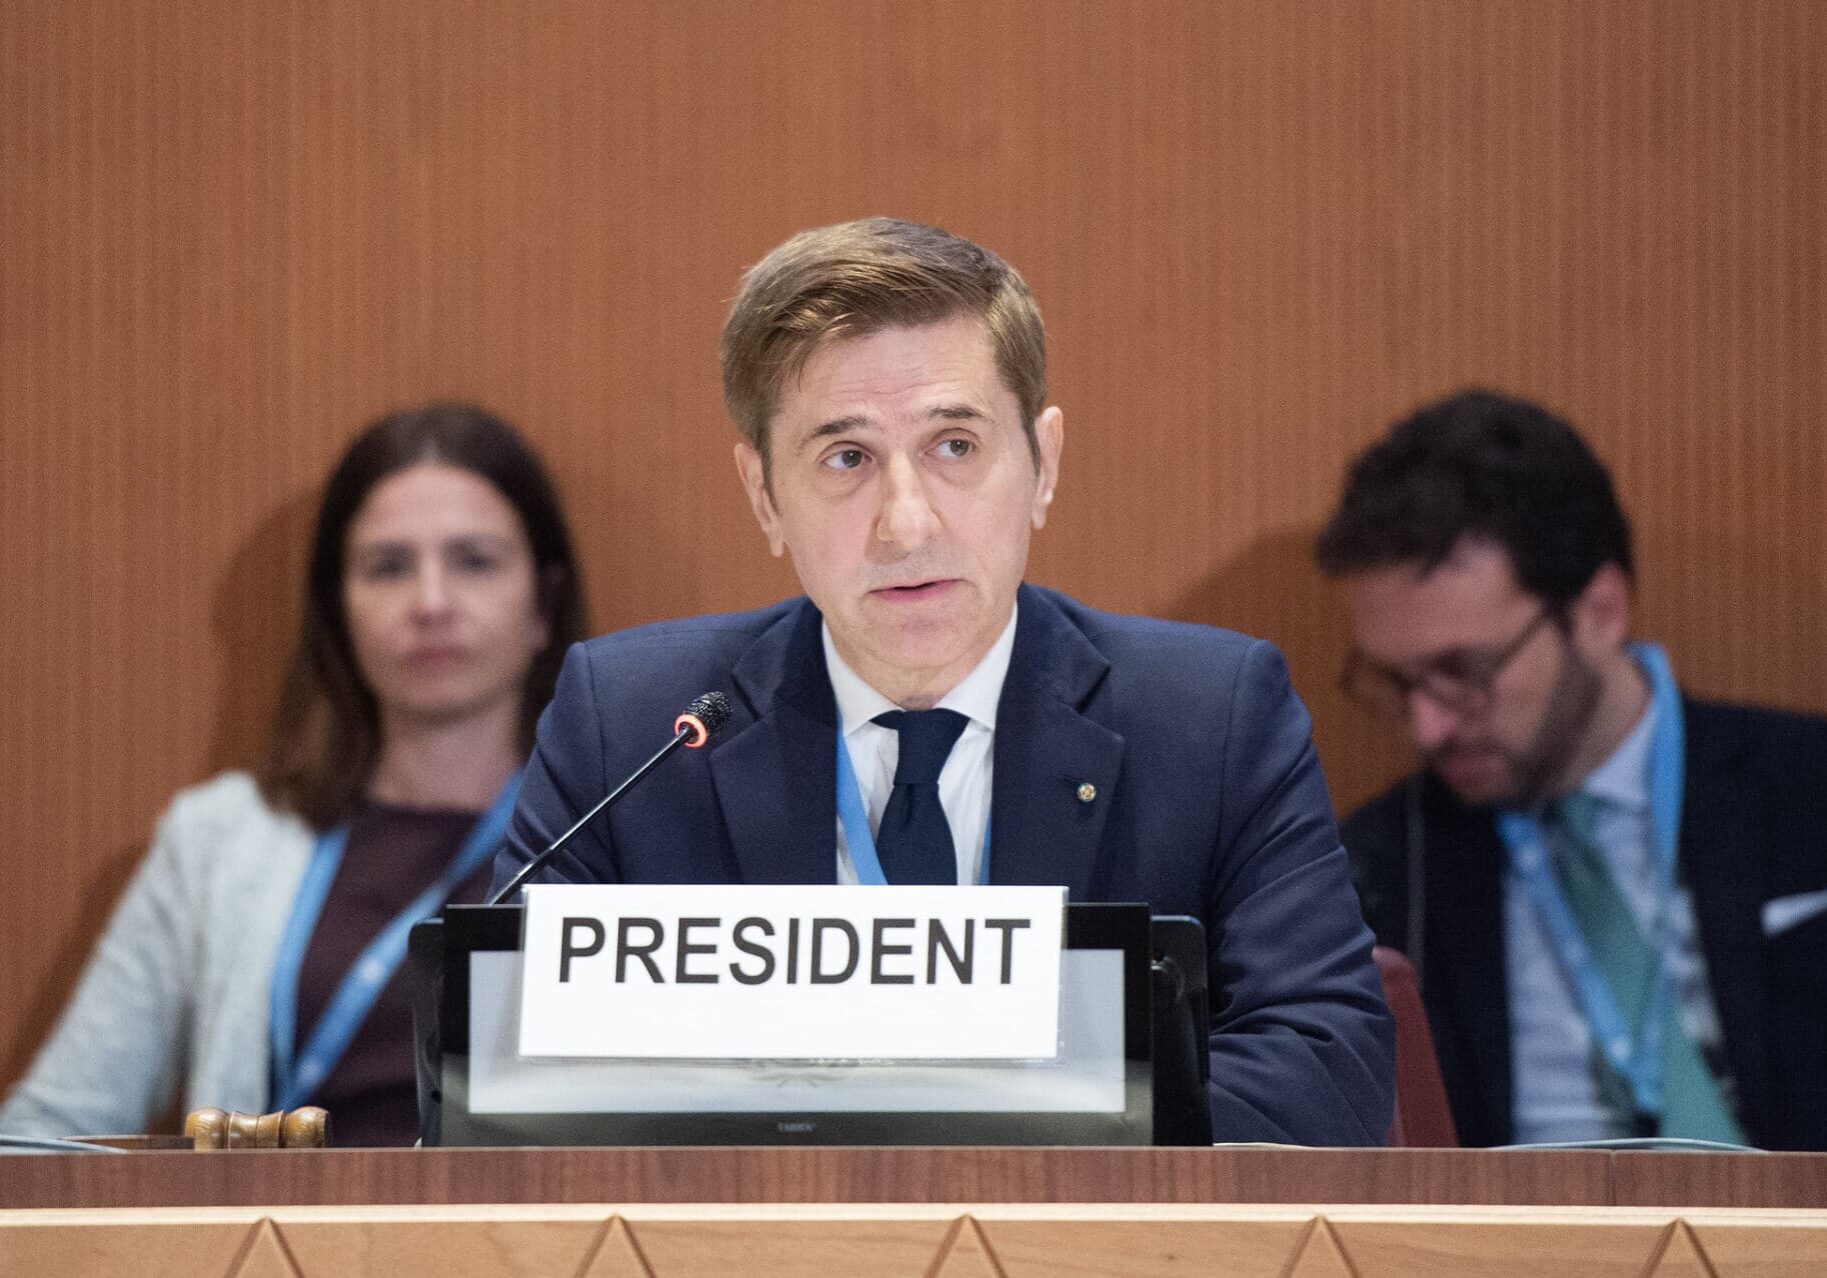 Ambassador Leonardo Bencini of Italy in his role as president of the BWC's Ninth Review Conference. Palais des Nations. (UN photo, Violaine Martin)